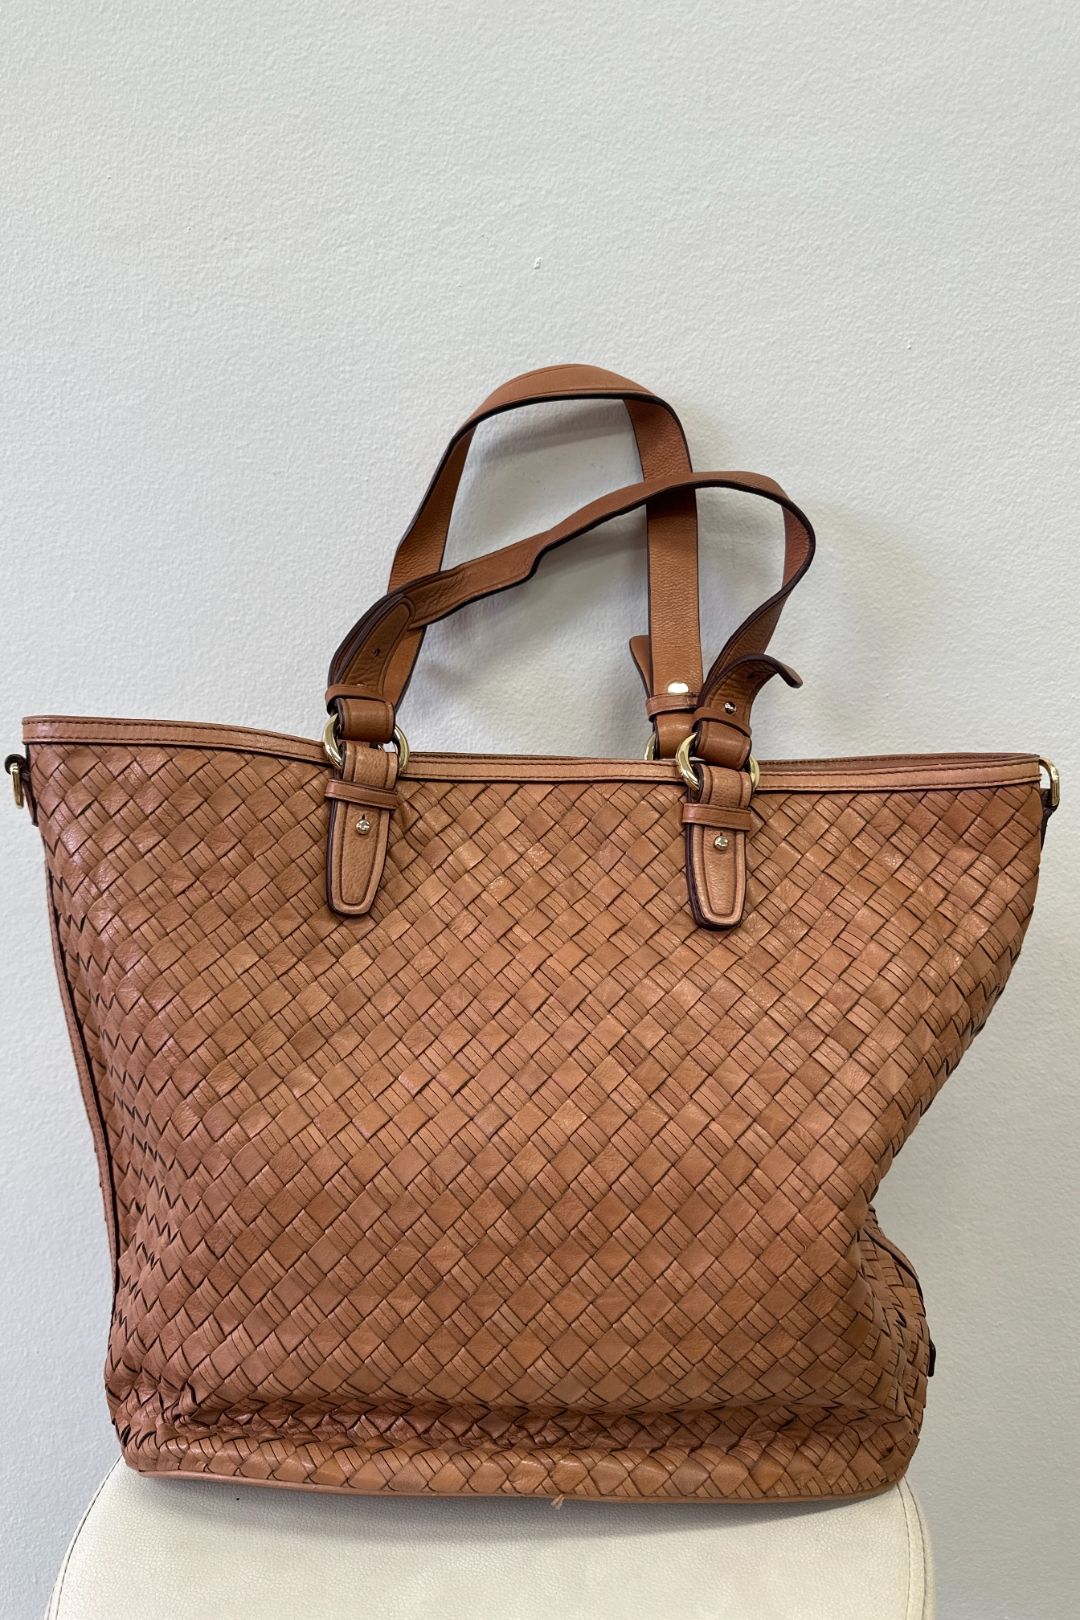 Cole Haan Tan Woven Tote Leather Bag